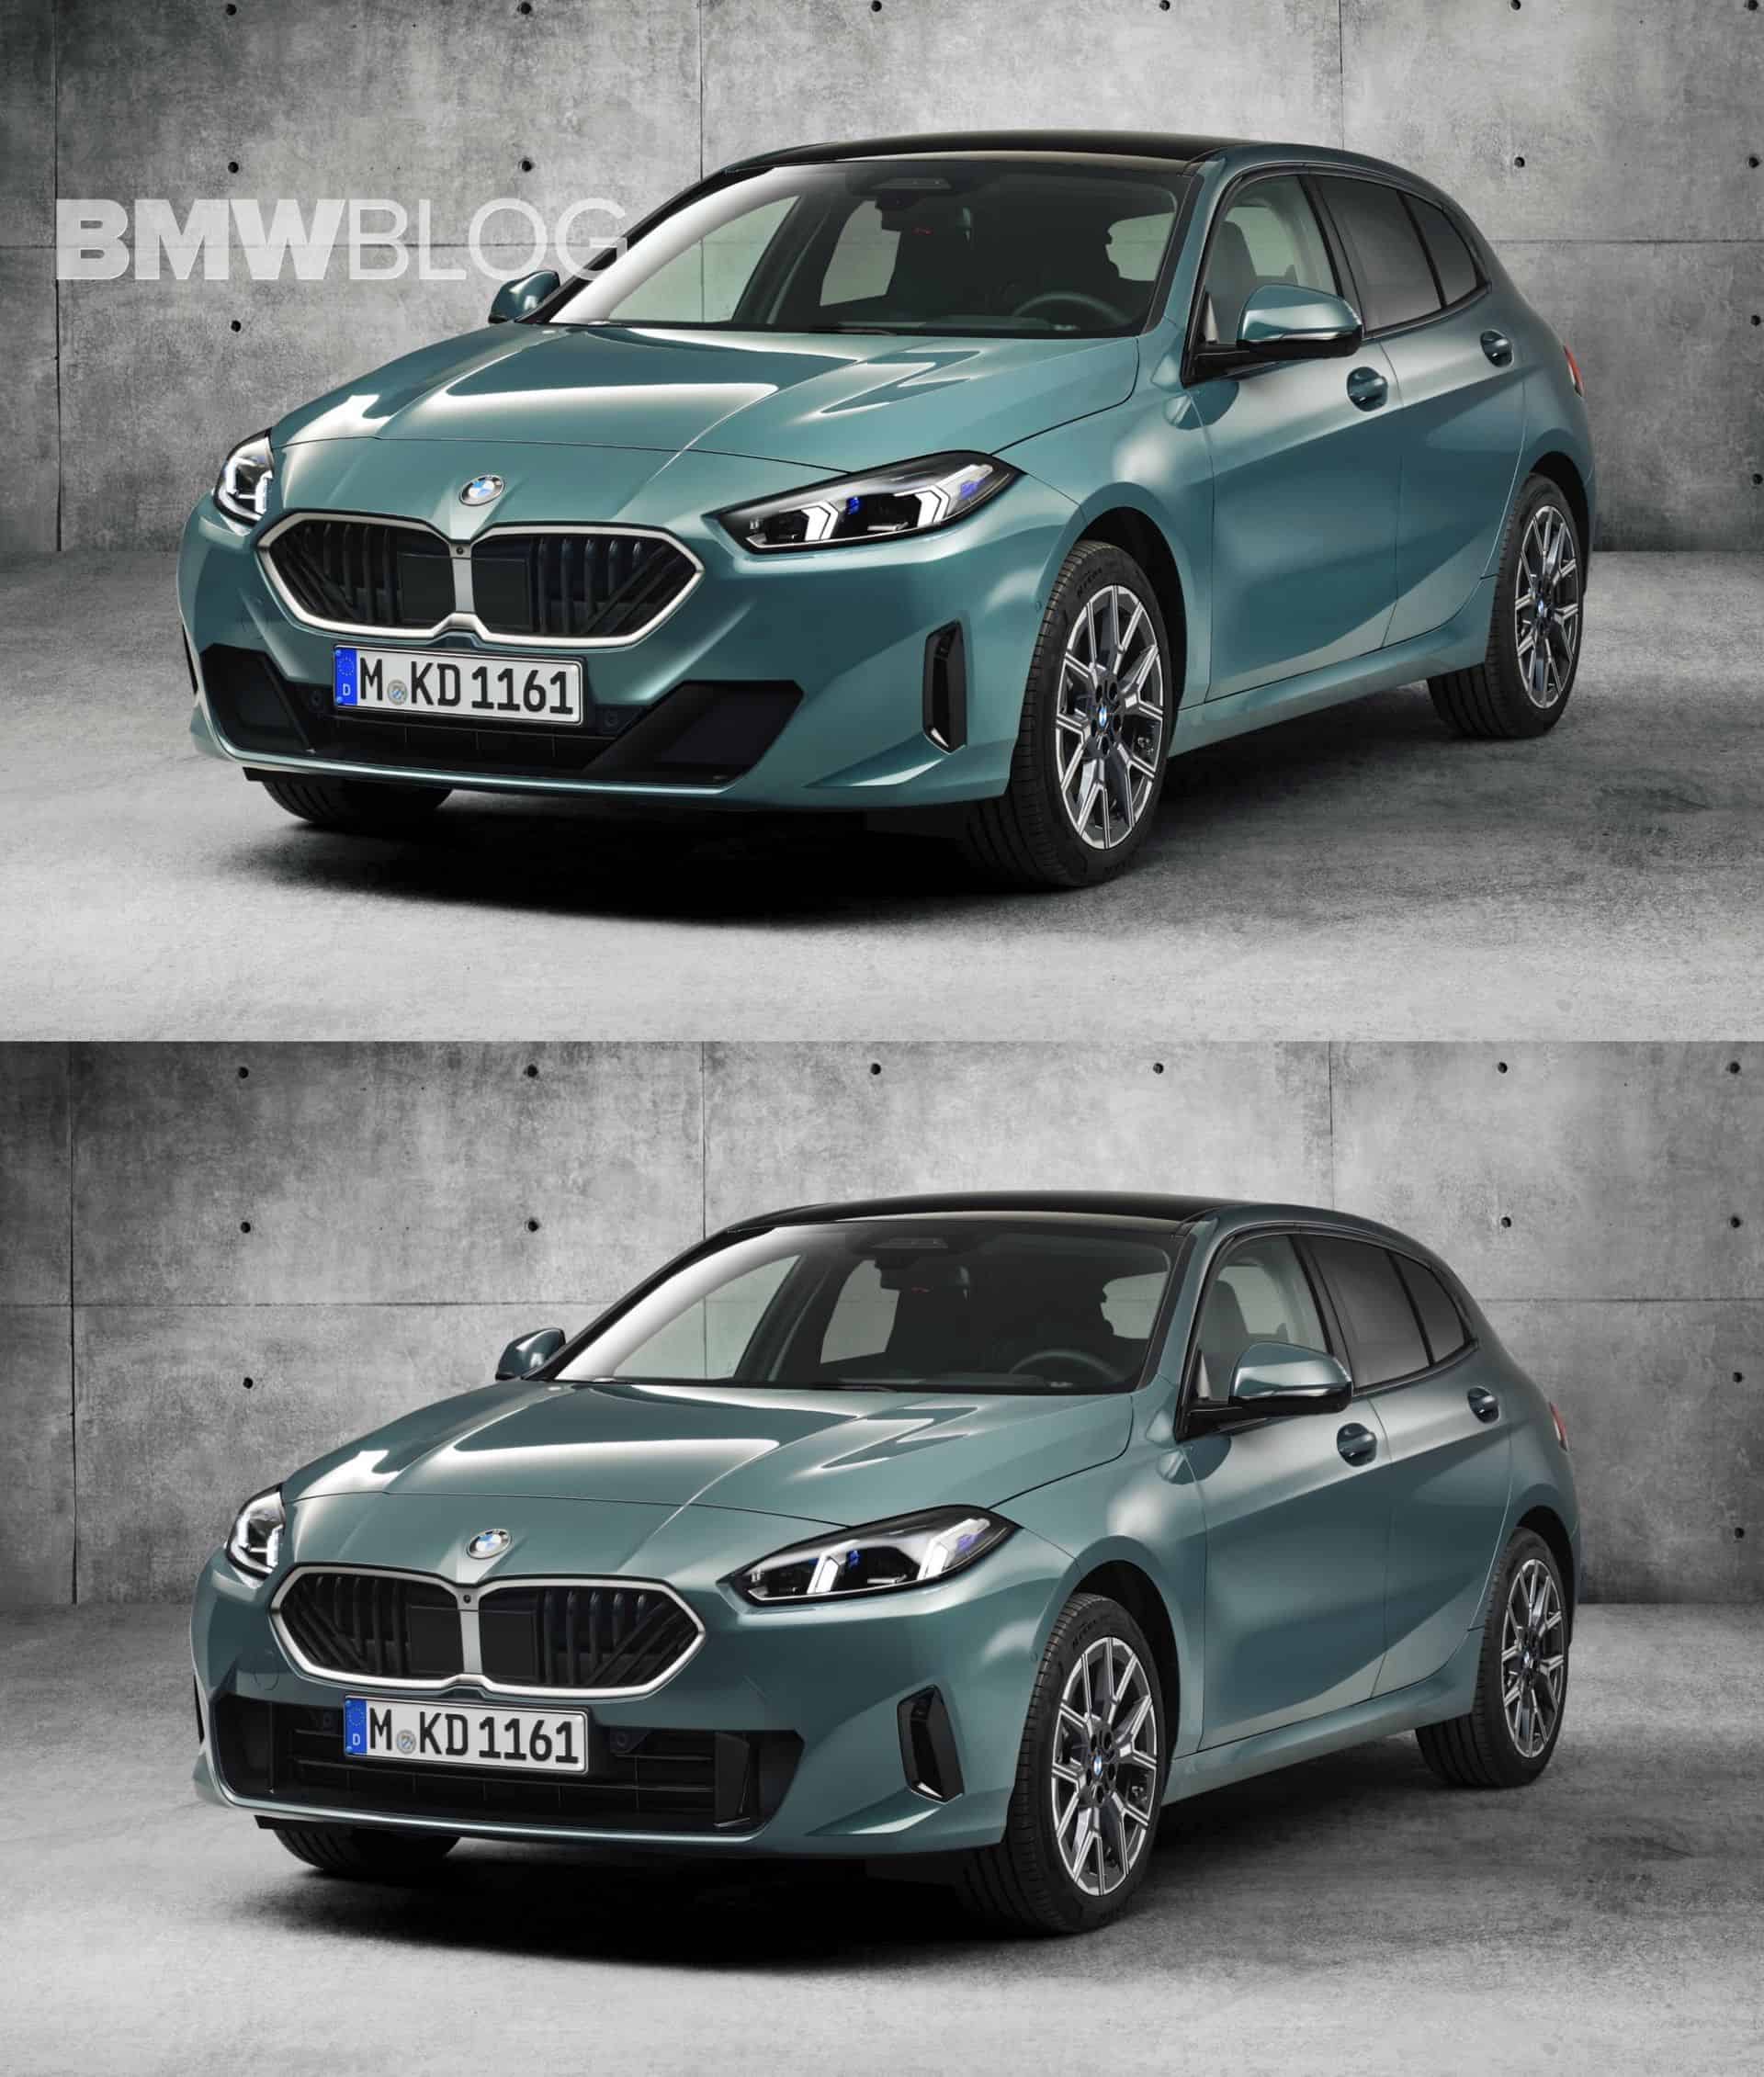 The Key Design Changes We Would Make to the New BMW 1 Series [Video]